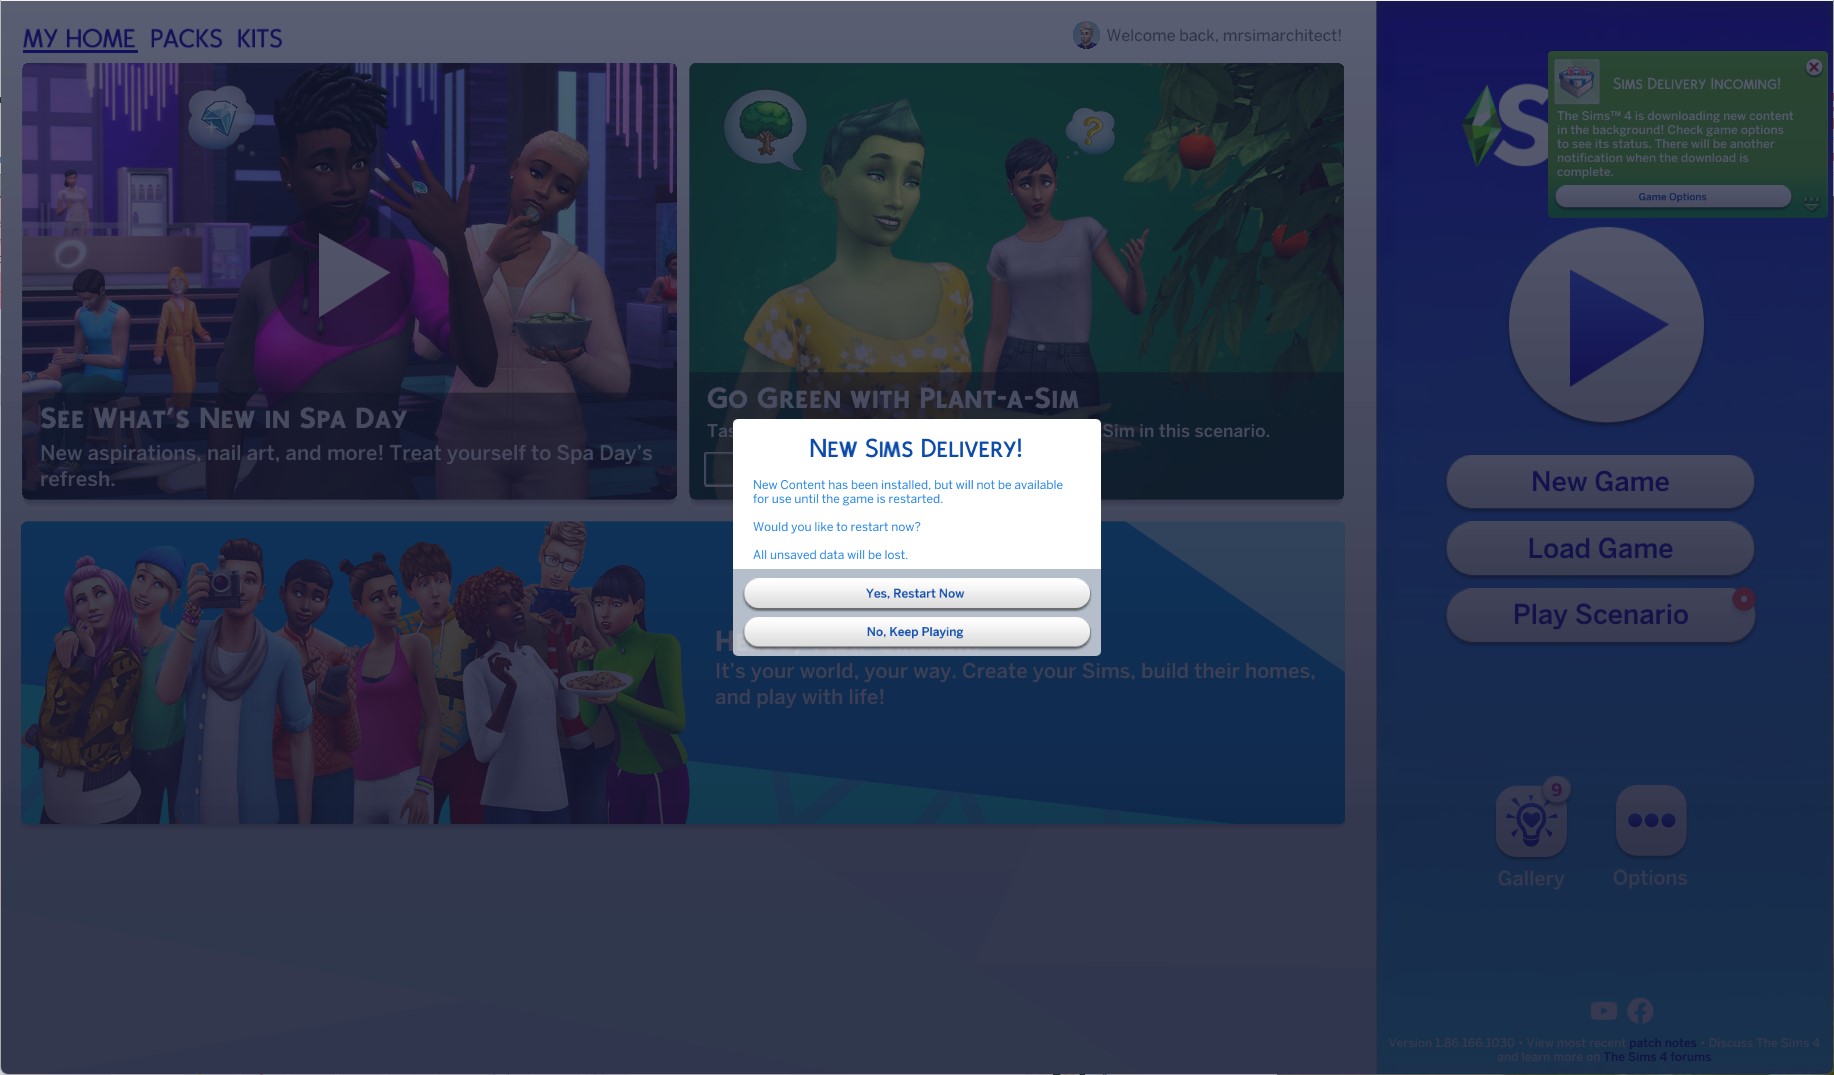 The Sims 4 Delivery Express Beta 5.0.1 - April 13, 2022 - The Sim Architect